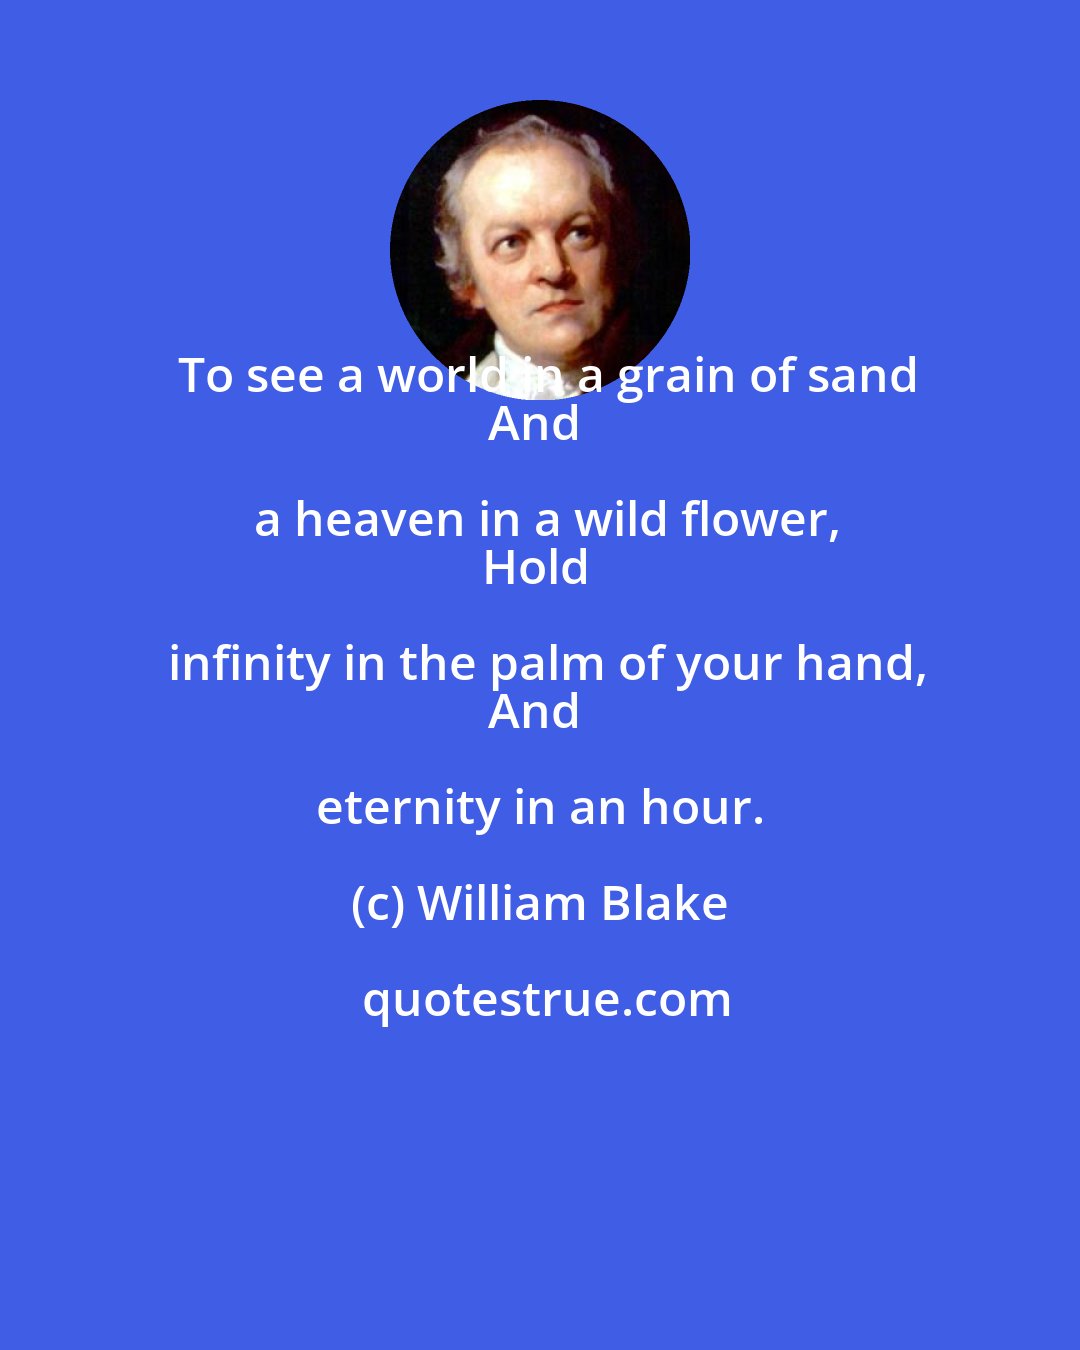 William Blake: To see a world in a grain of sand
And a heaven in a wild flower,
Hold infinity in the palm of your hand,
And eternity in an hour.